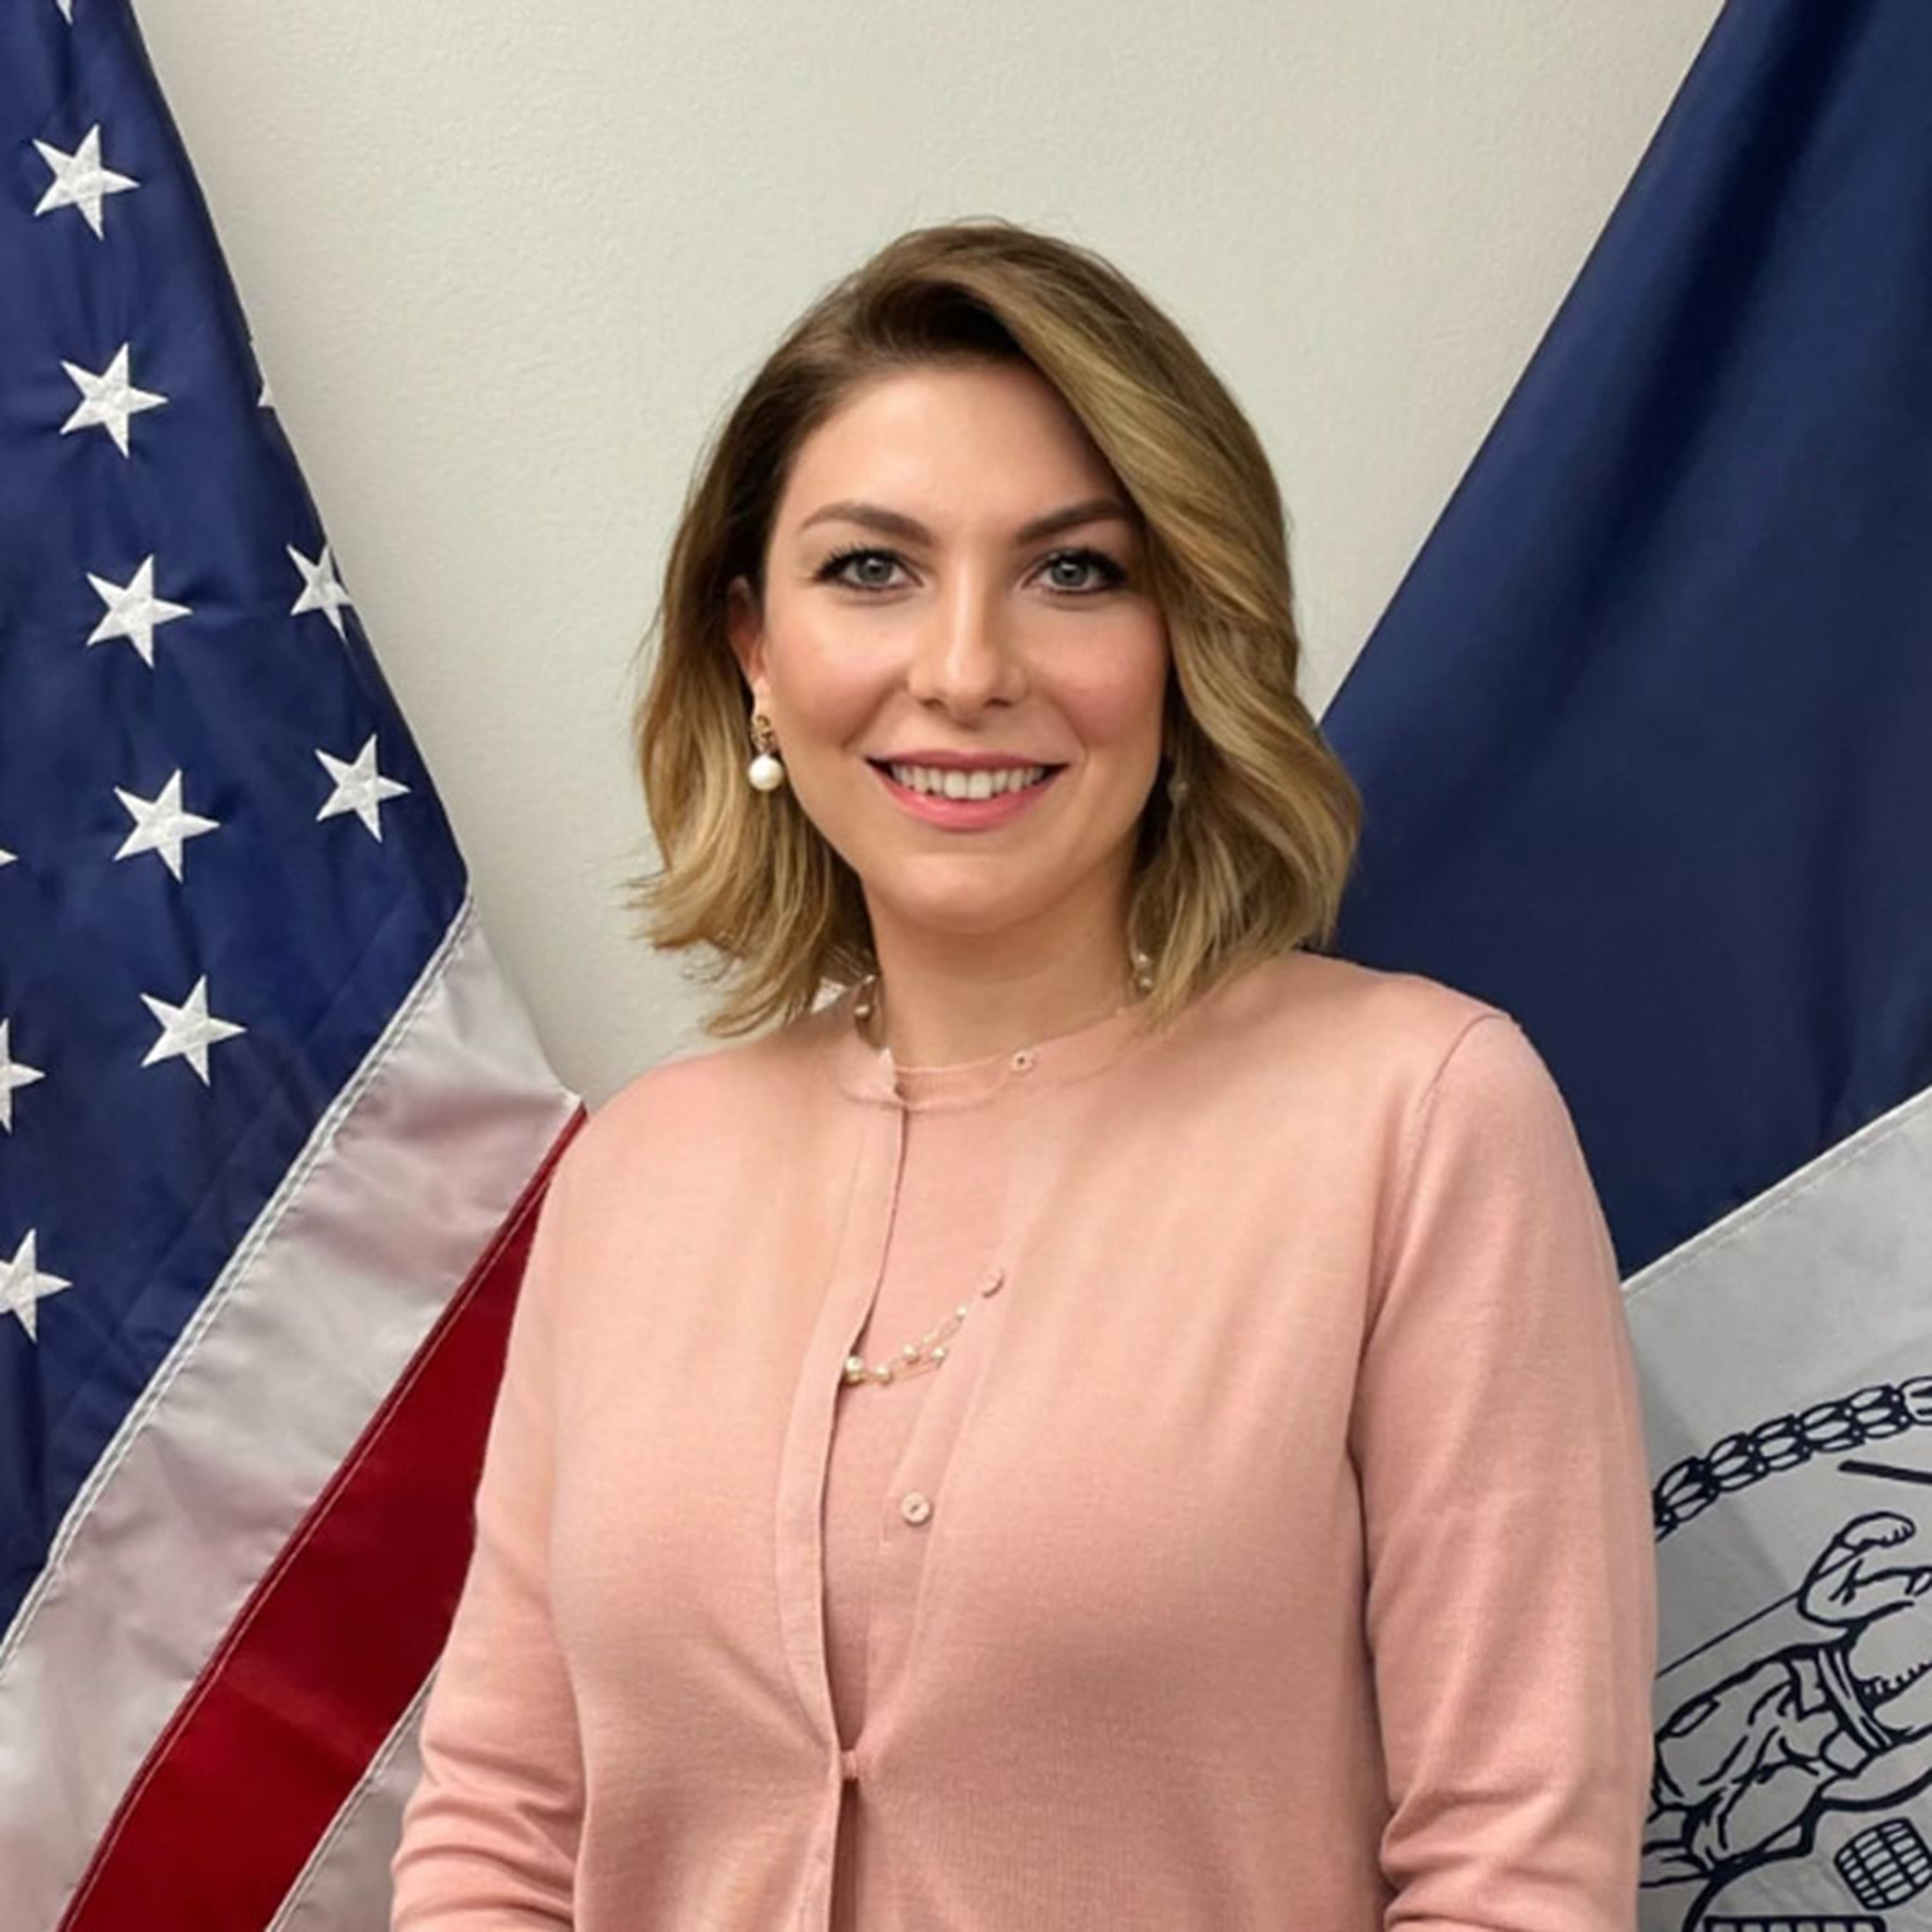 NYC Mayor Adams’ aide Rana Abbasova, who’s cooperating with feds, flew to Turkey for free, record show